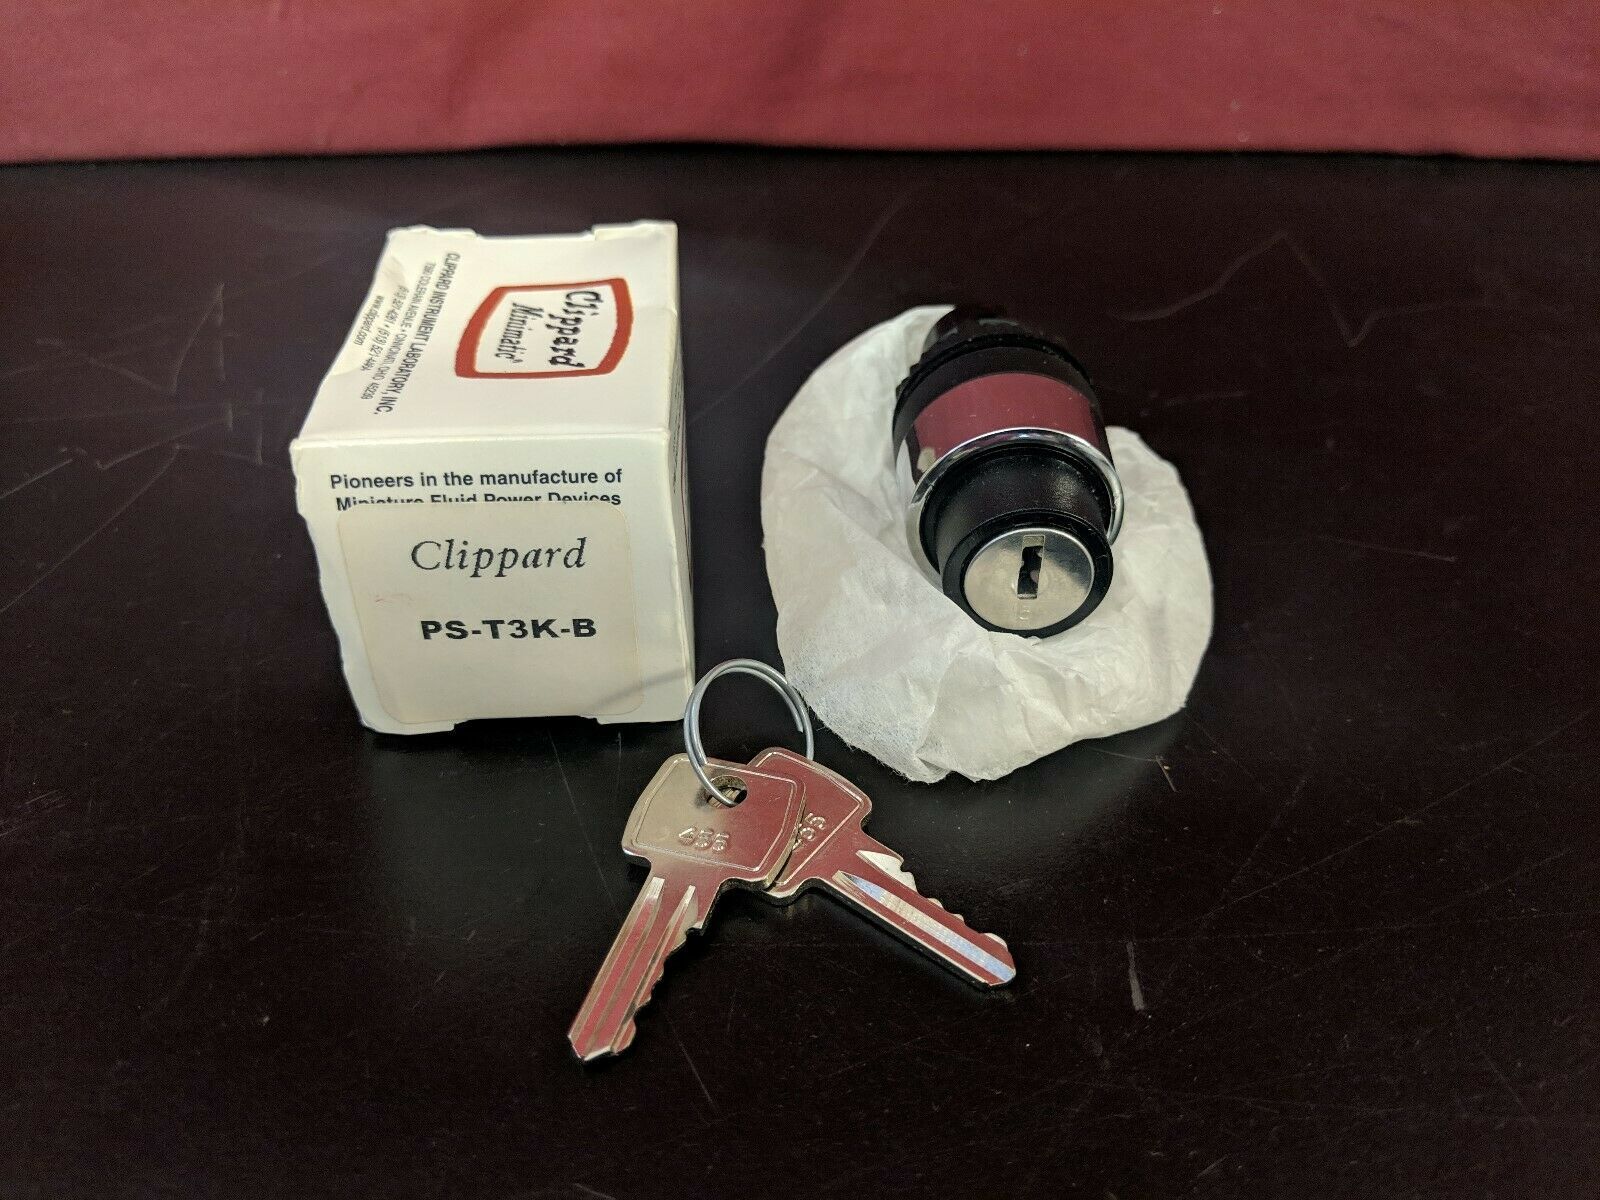 Clippard PS-T3K-B Push Button Actuator 22mm Microswitch Key Twist 90° Maintained - $71.96